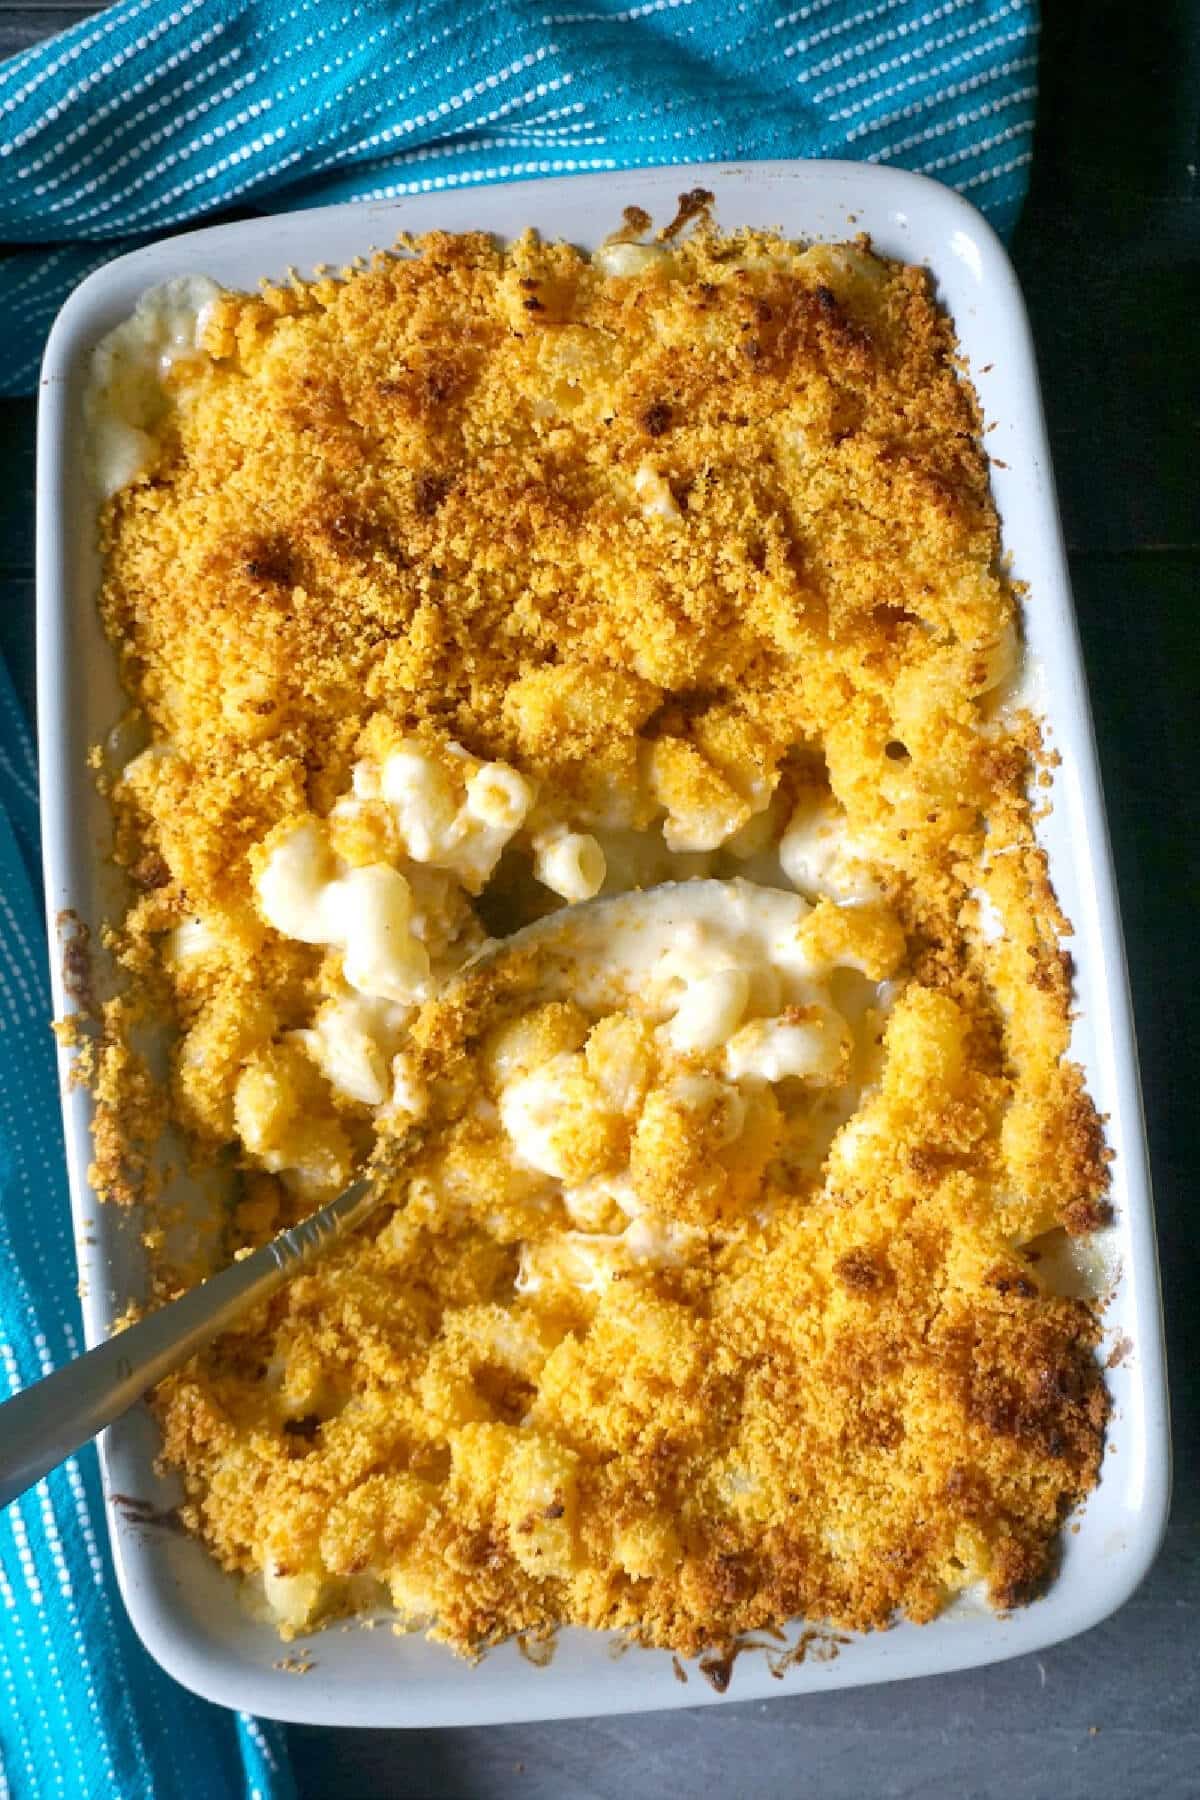 A dish with mac and cheese topped with bread crumbs.